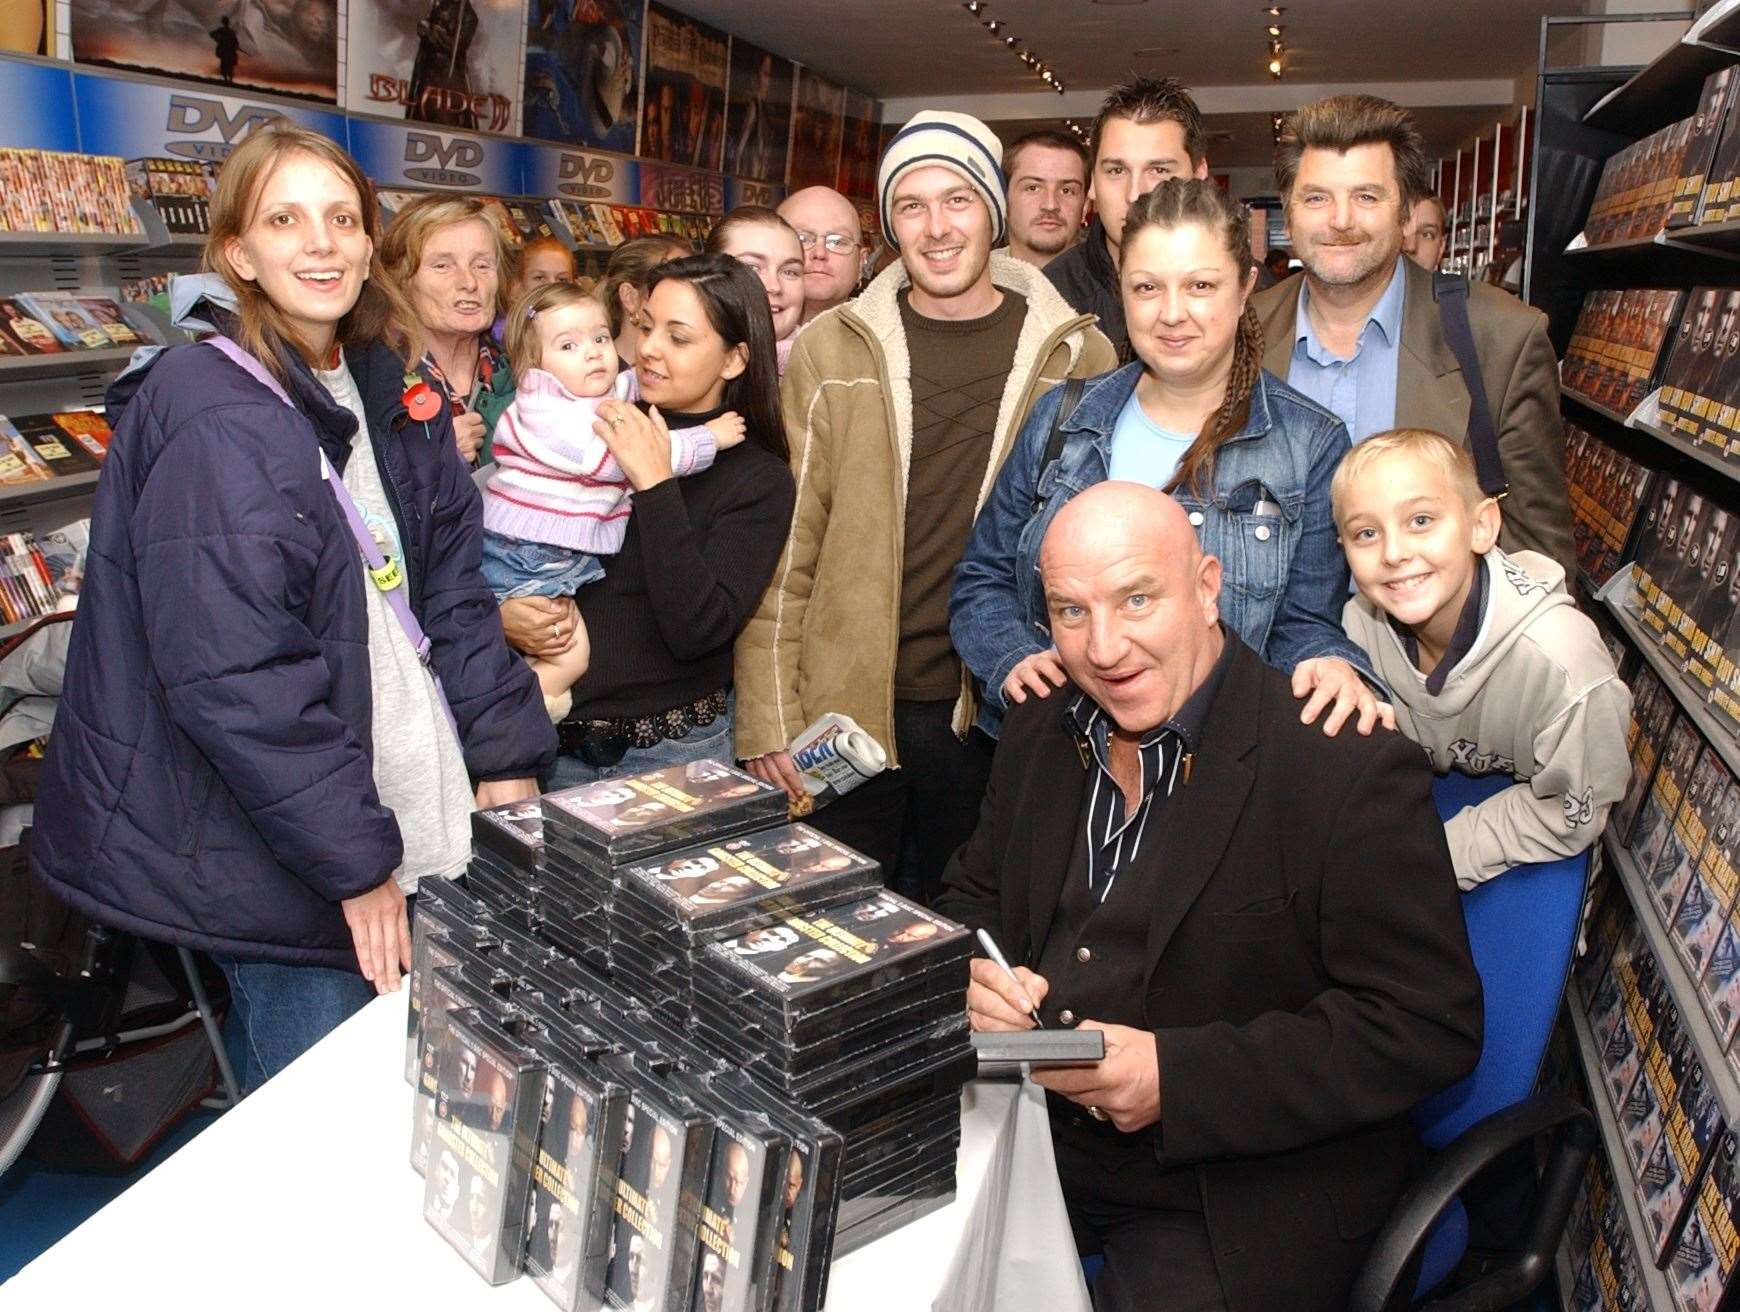 Dave Courtney signed copies of his DVD in Chatham High Street. Picture: Jim Rantell